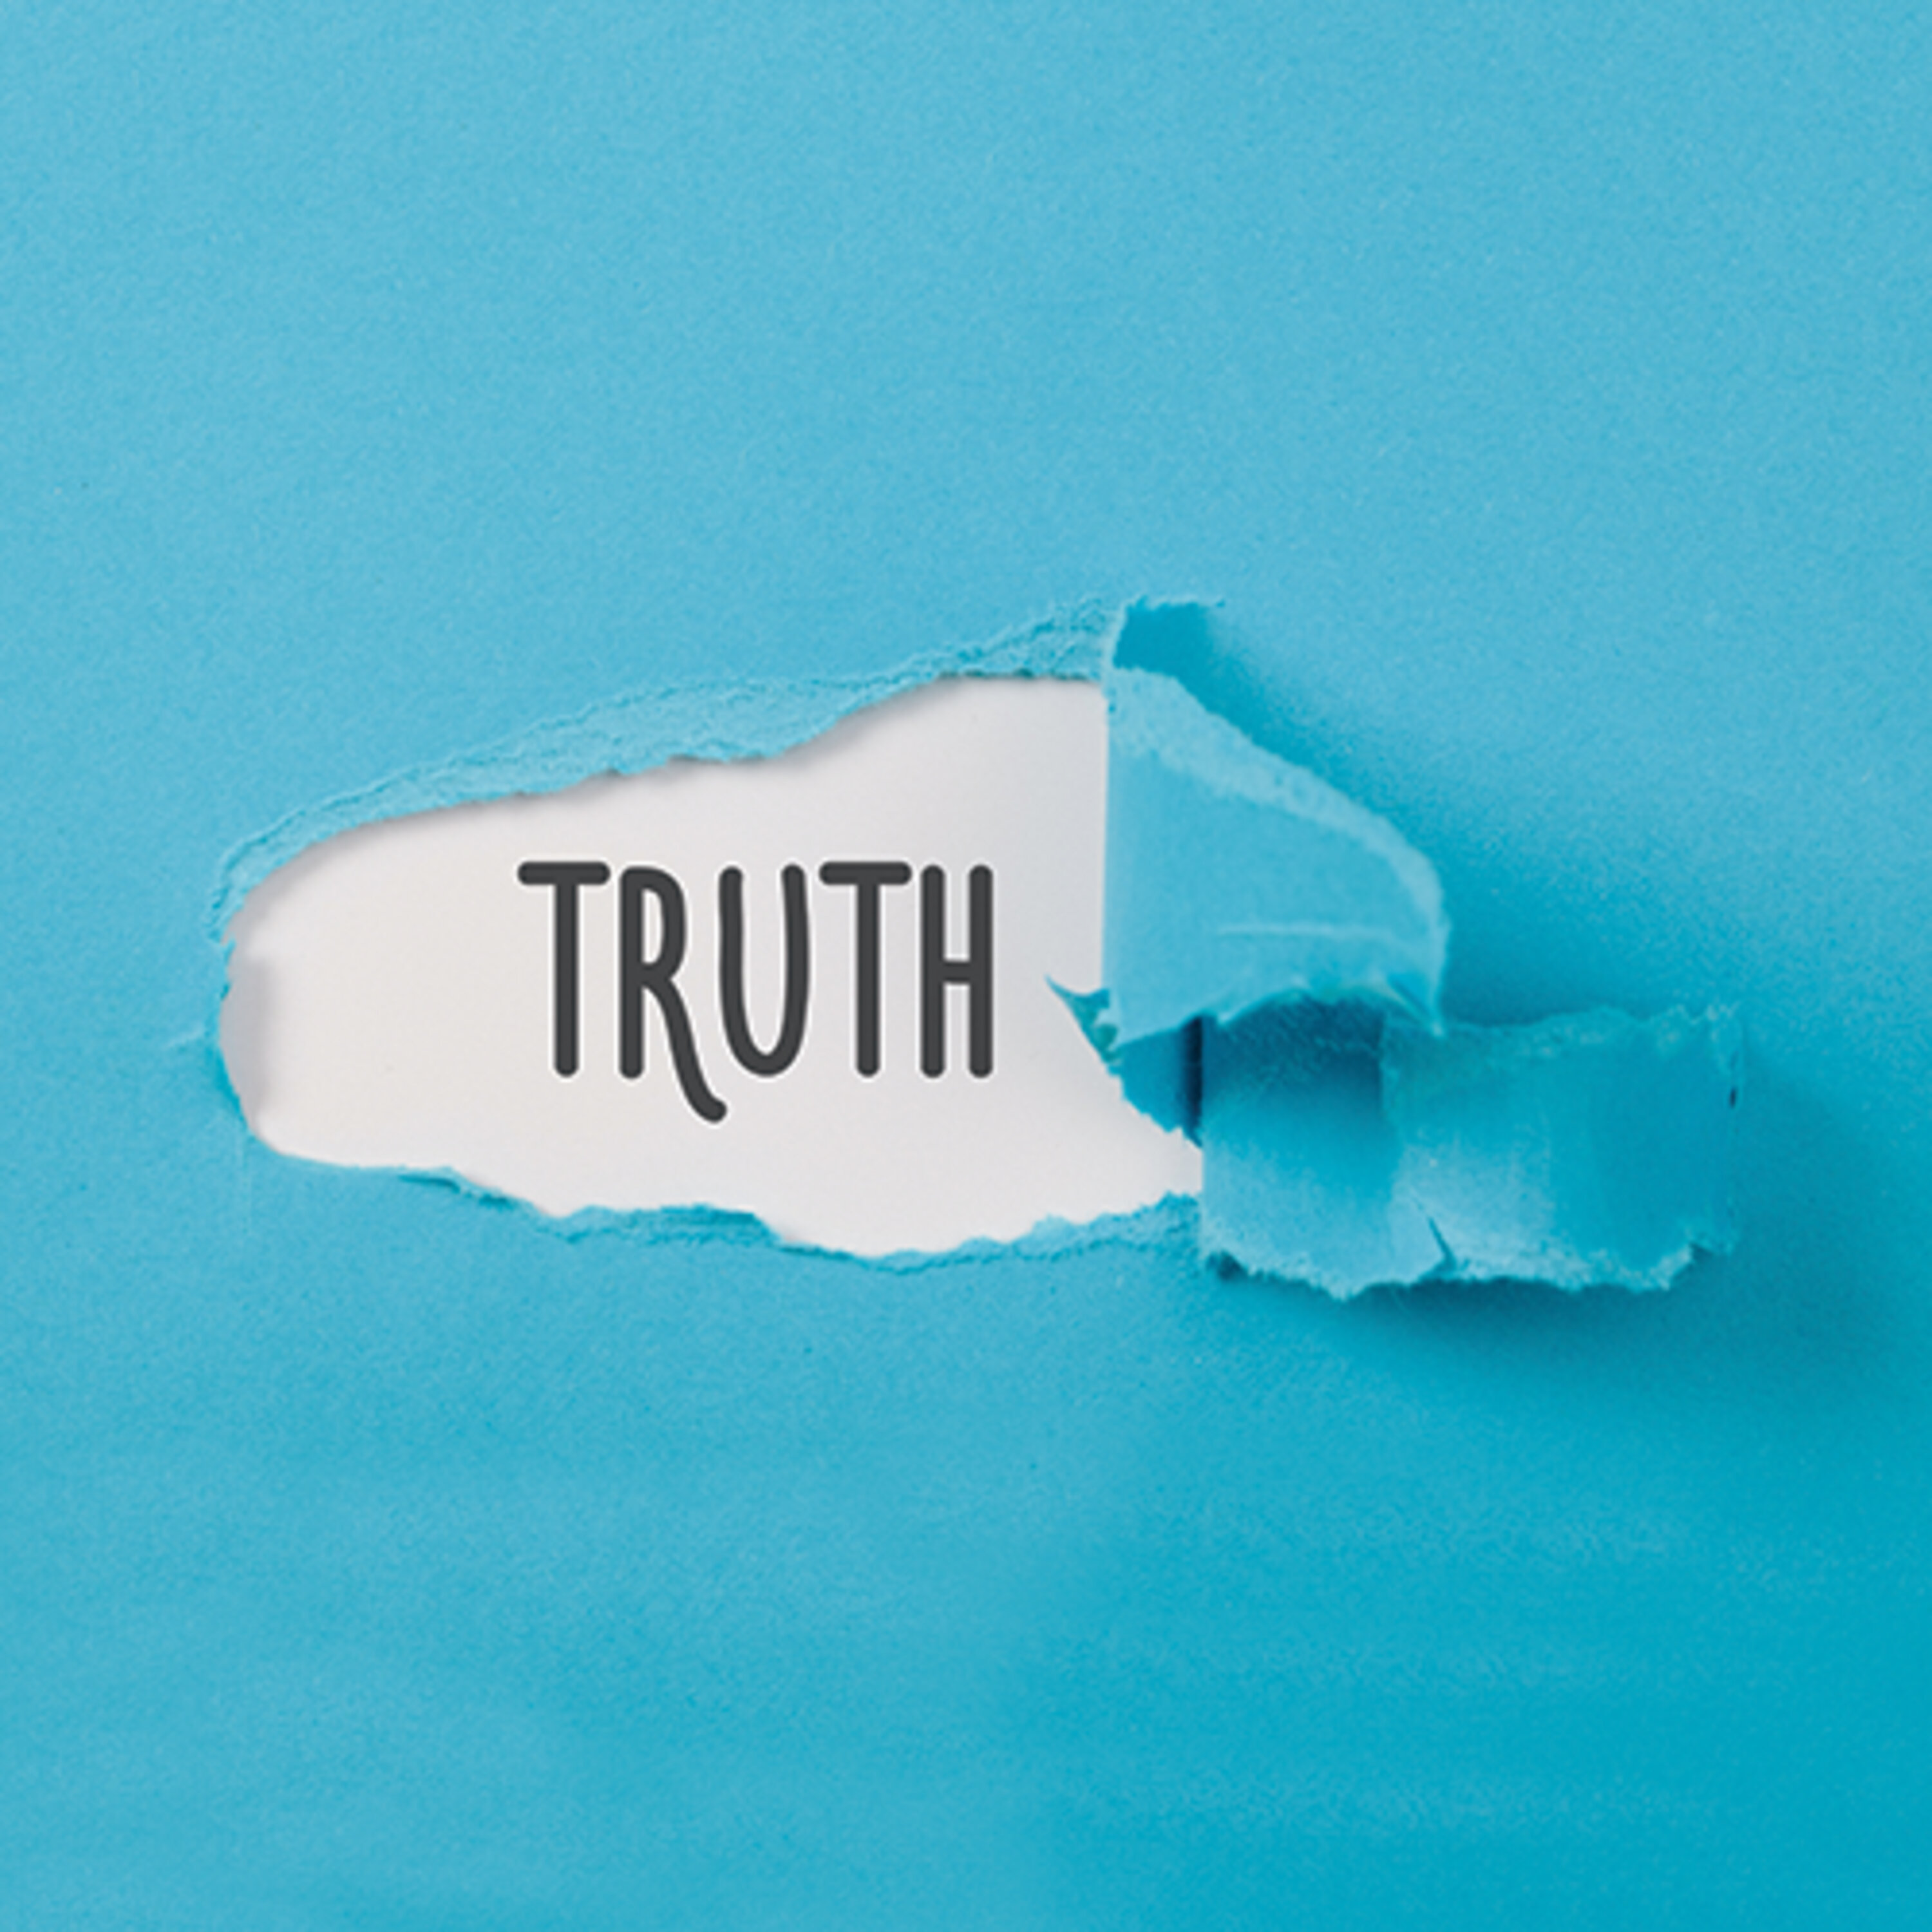 Truth or Lies: Fighting Back Against Misinformation